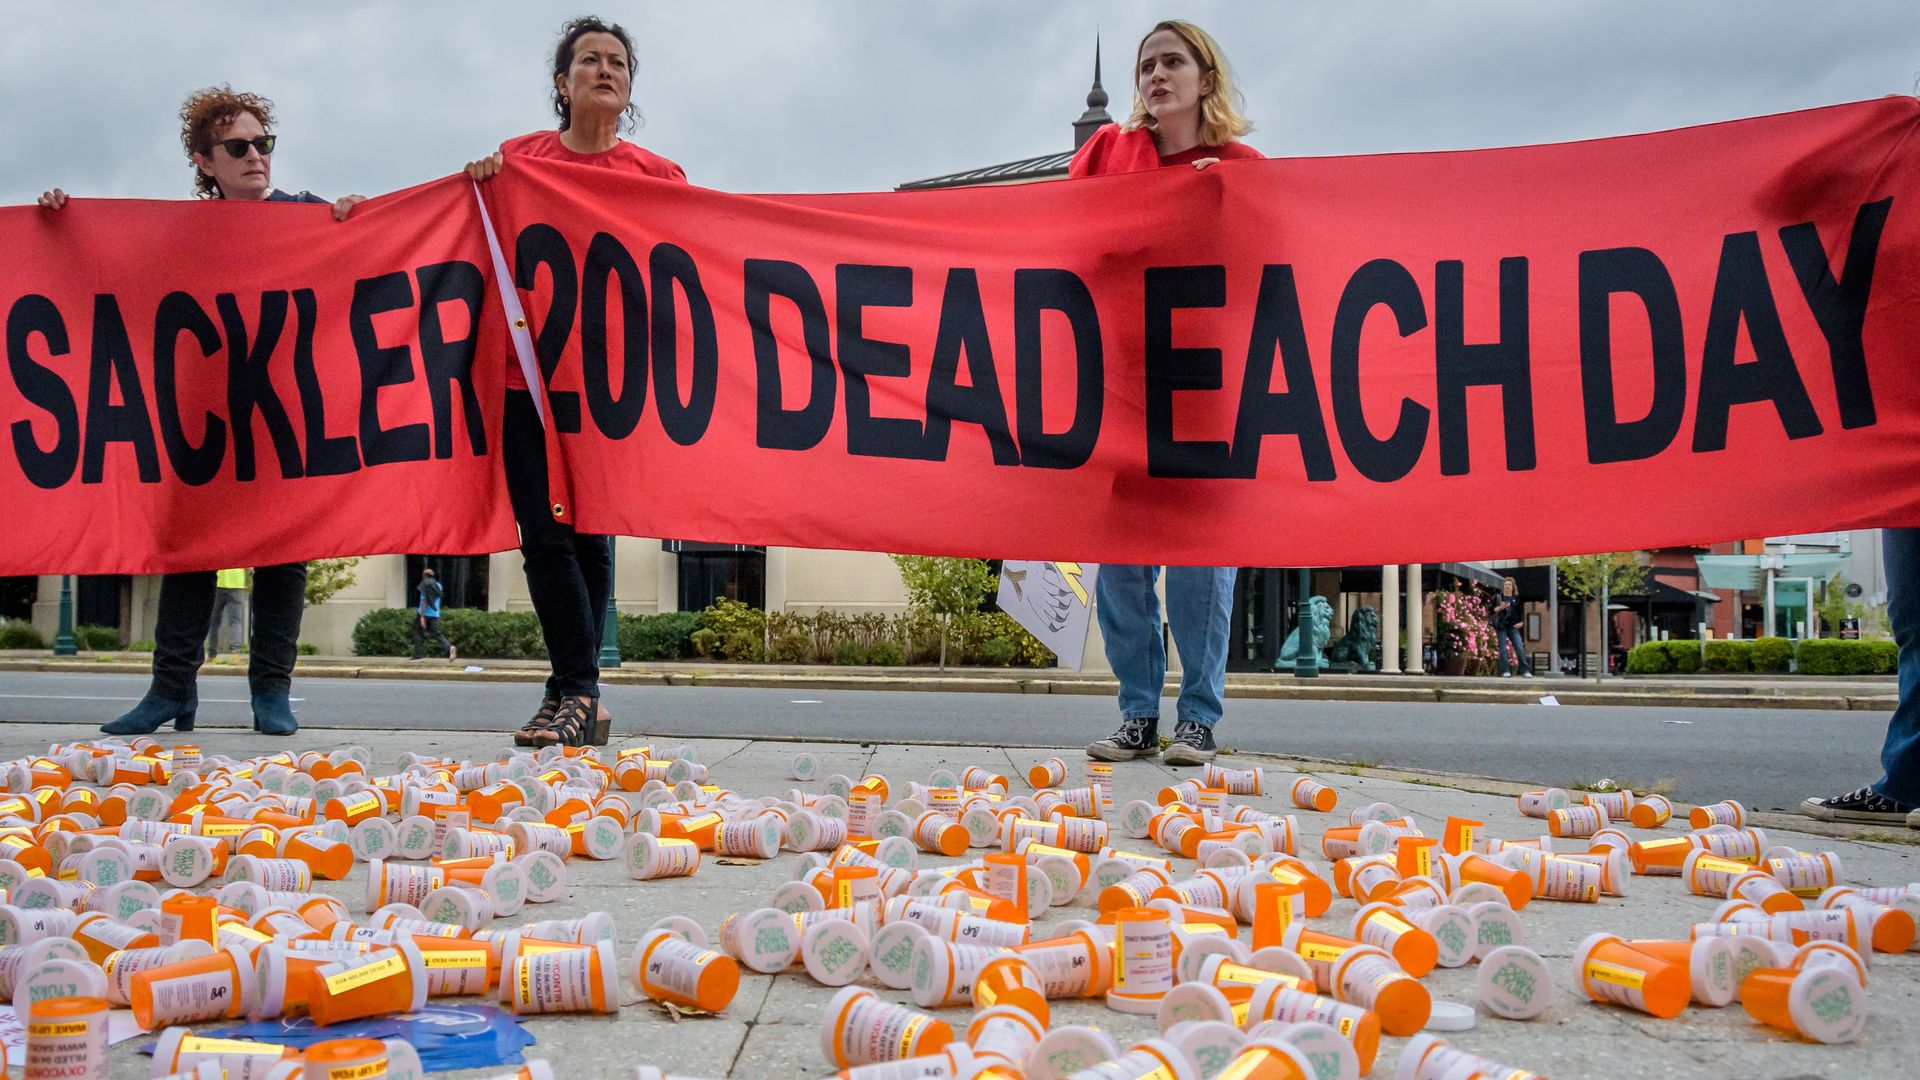 In this image, a banner reading "Sackler" and "200 each day" is held by three people who stand next to a large number of prescription bottles clustered on the ground.